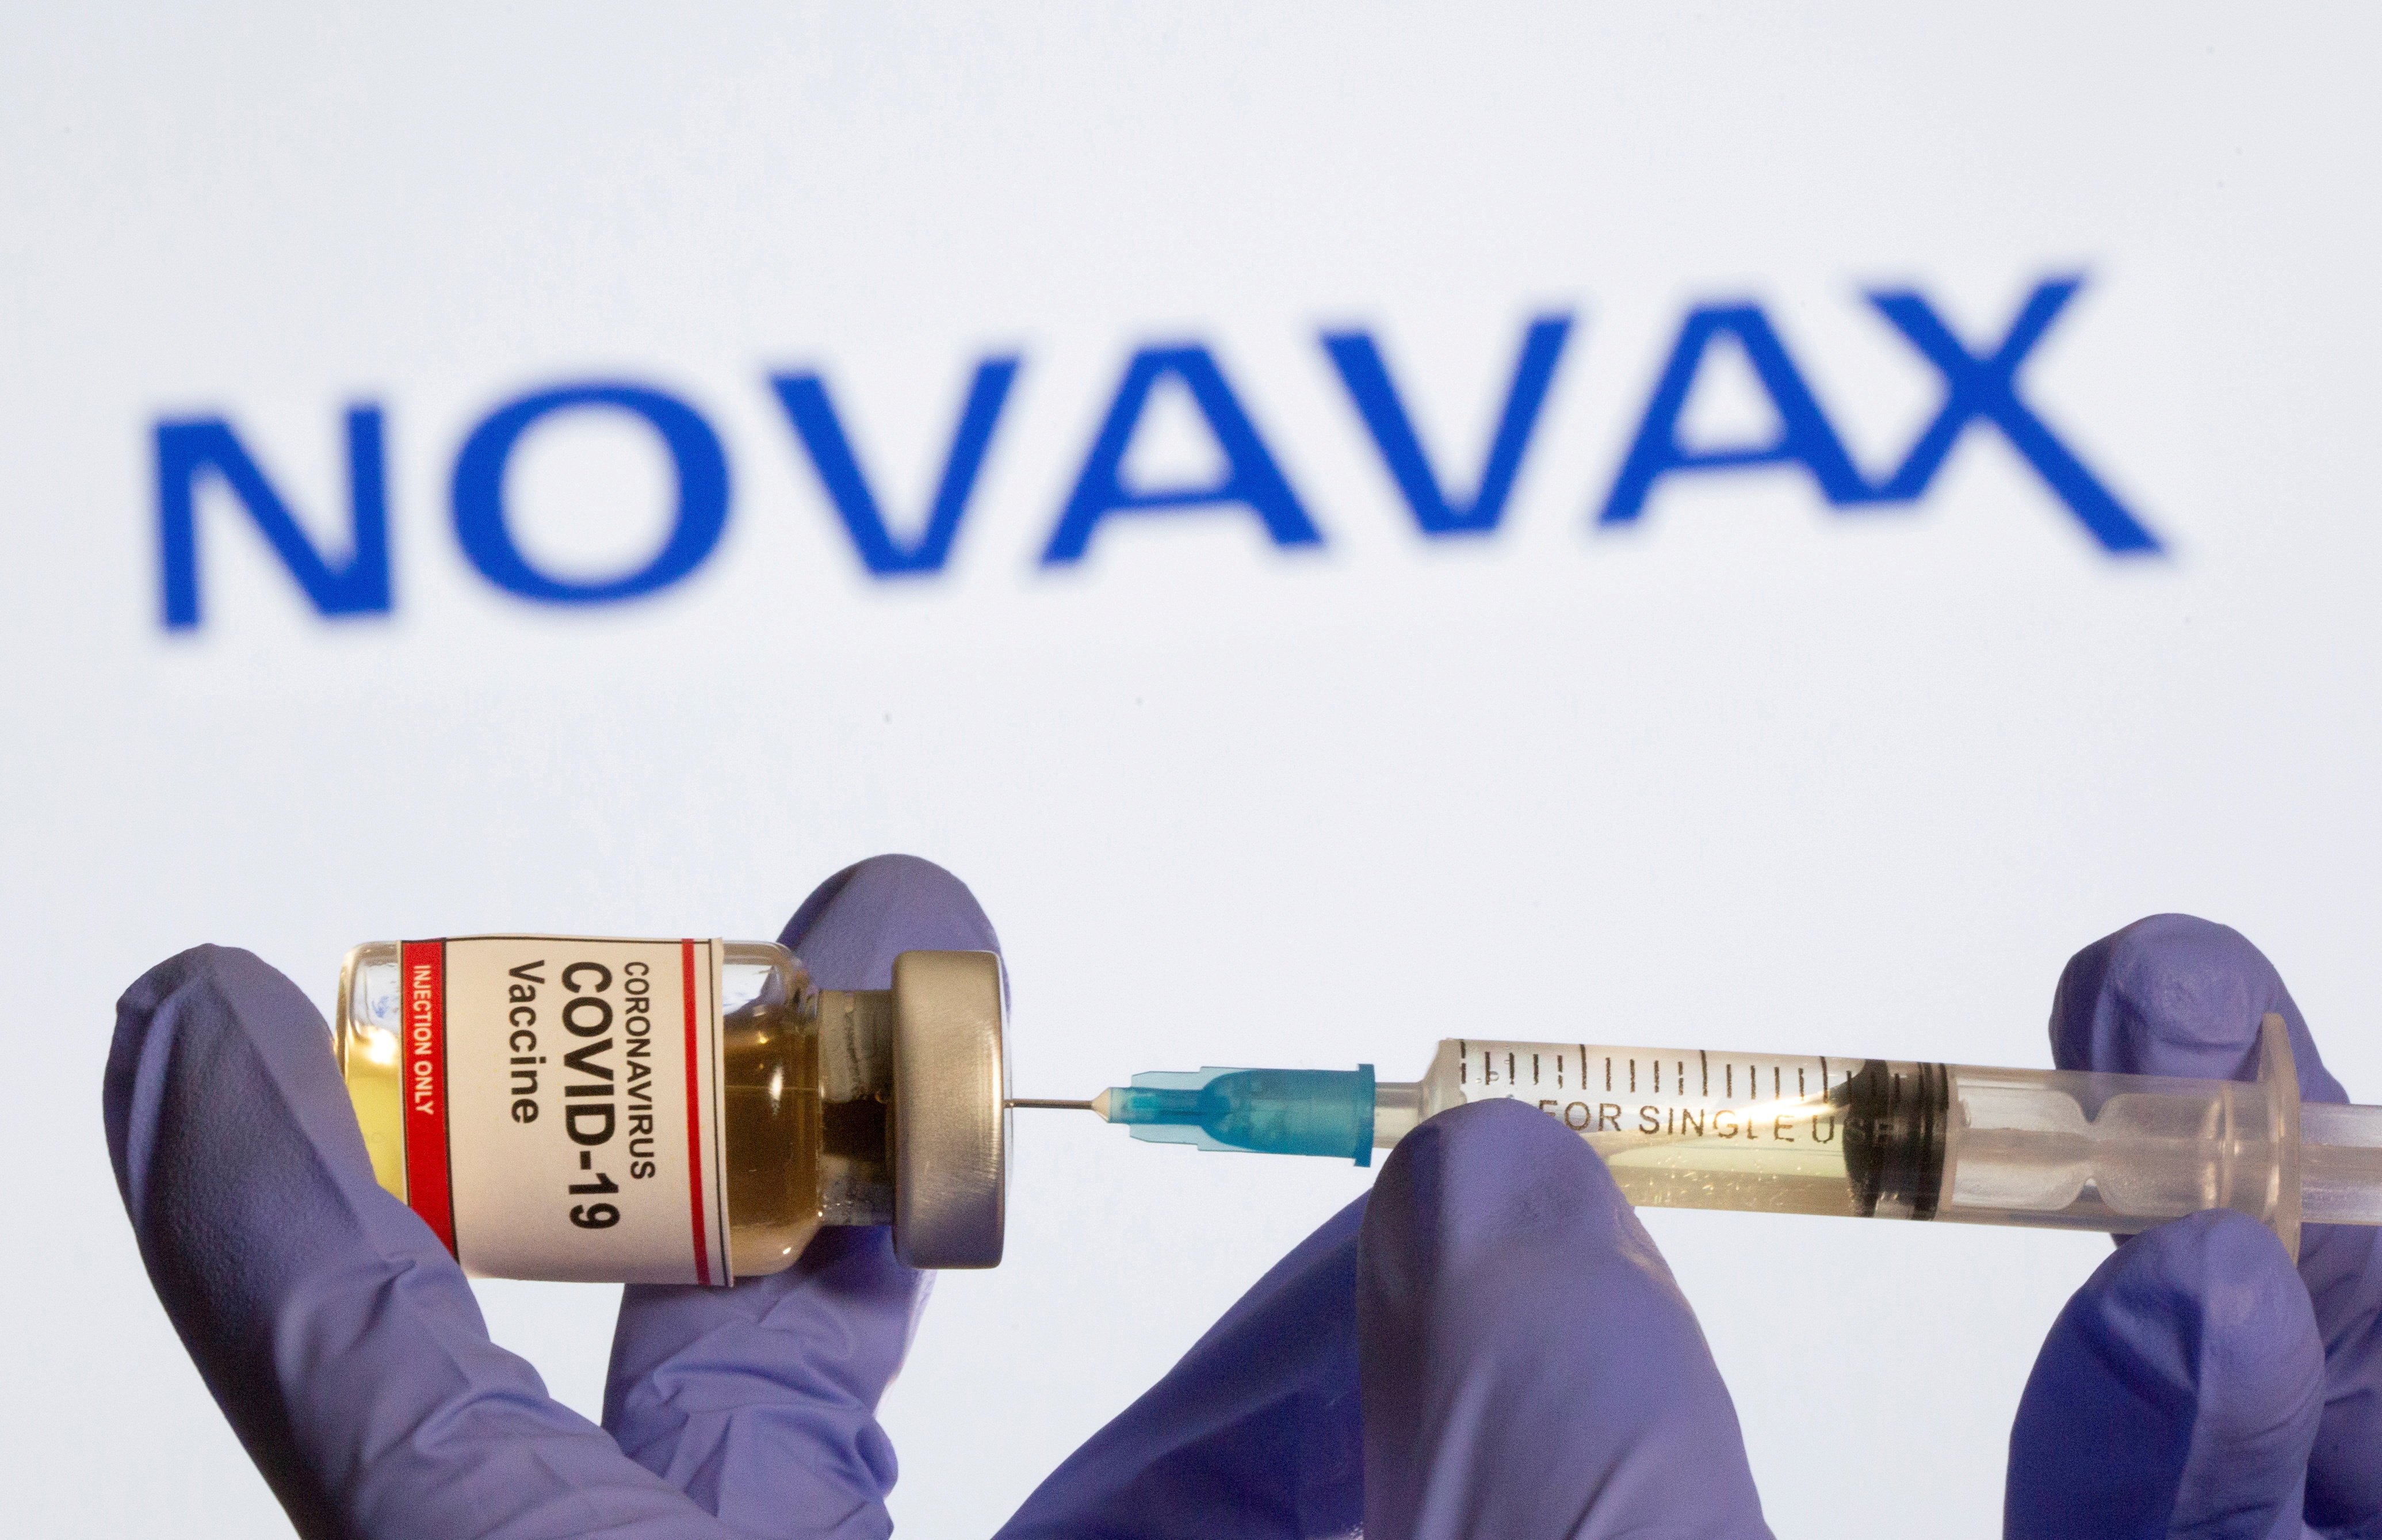 British pharmaceutical firm GlaxoSmithKline’s deal to manufacture the Novavax Covid-19 vaccine will help shore up local supply. Photo: Reuters